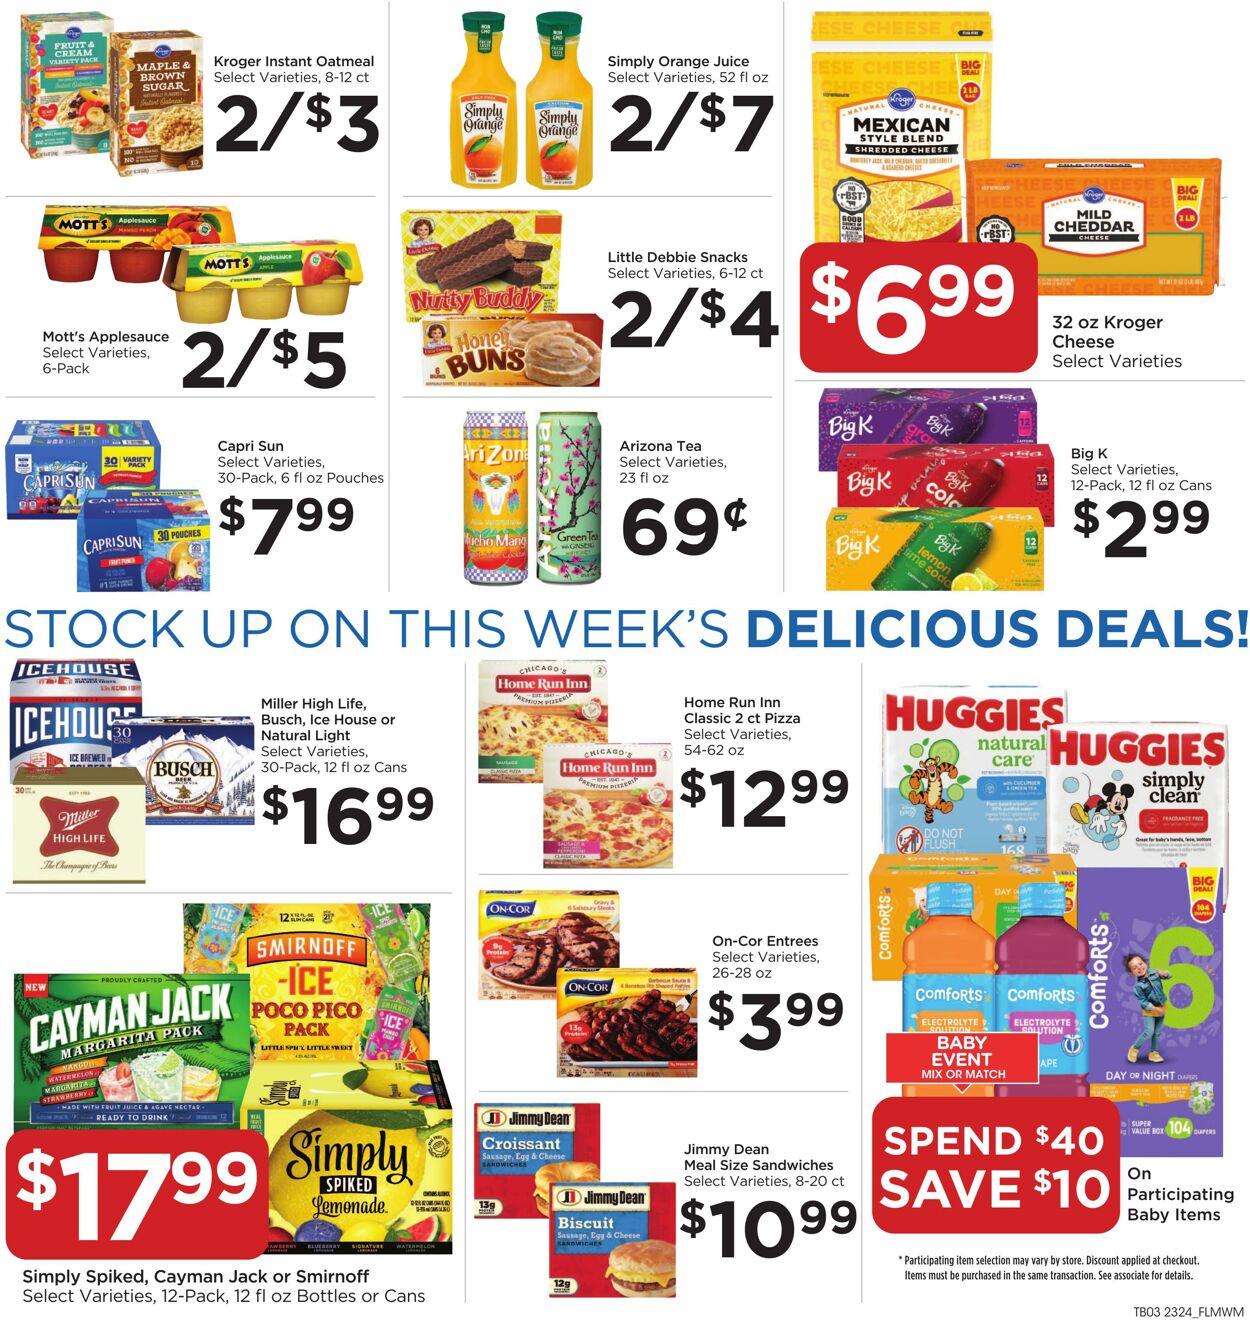 Catalogue Food 4 Less from 07/12/2023